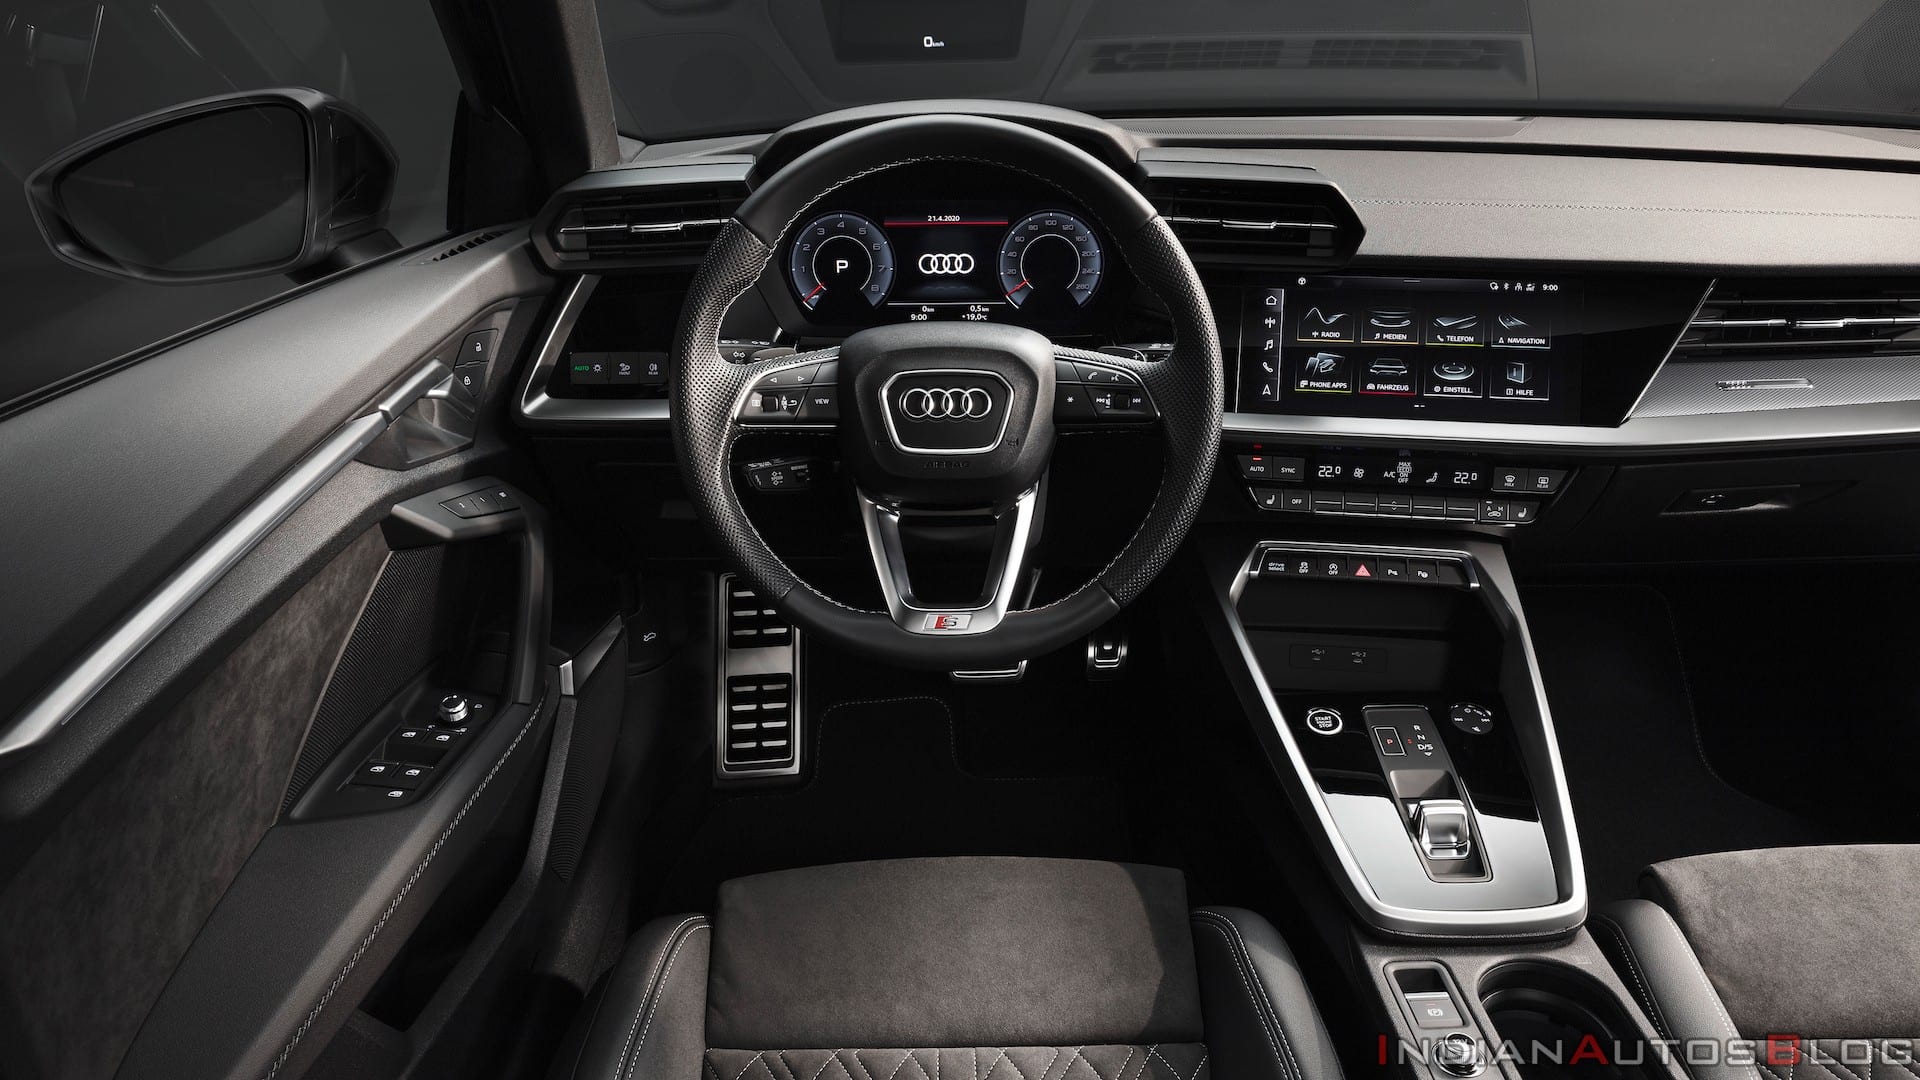 Audi Mmi Models The Features The Differences And How To Find Your Model